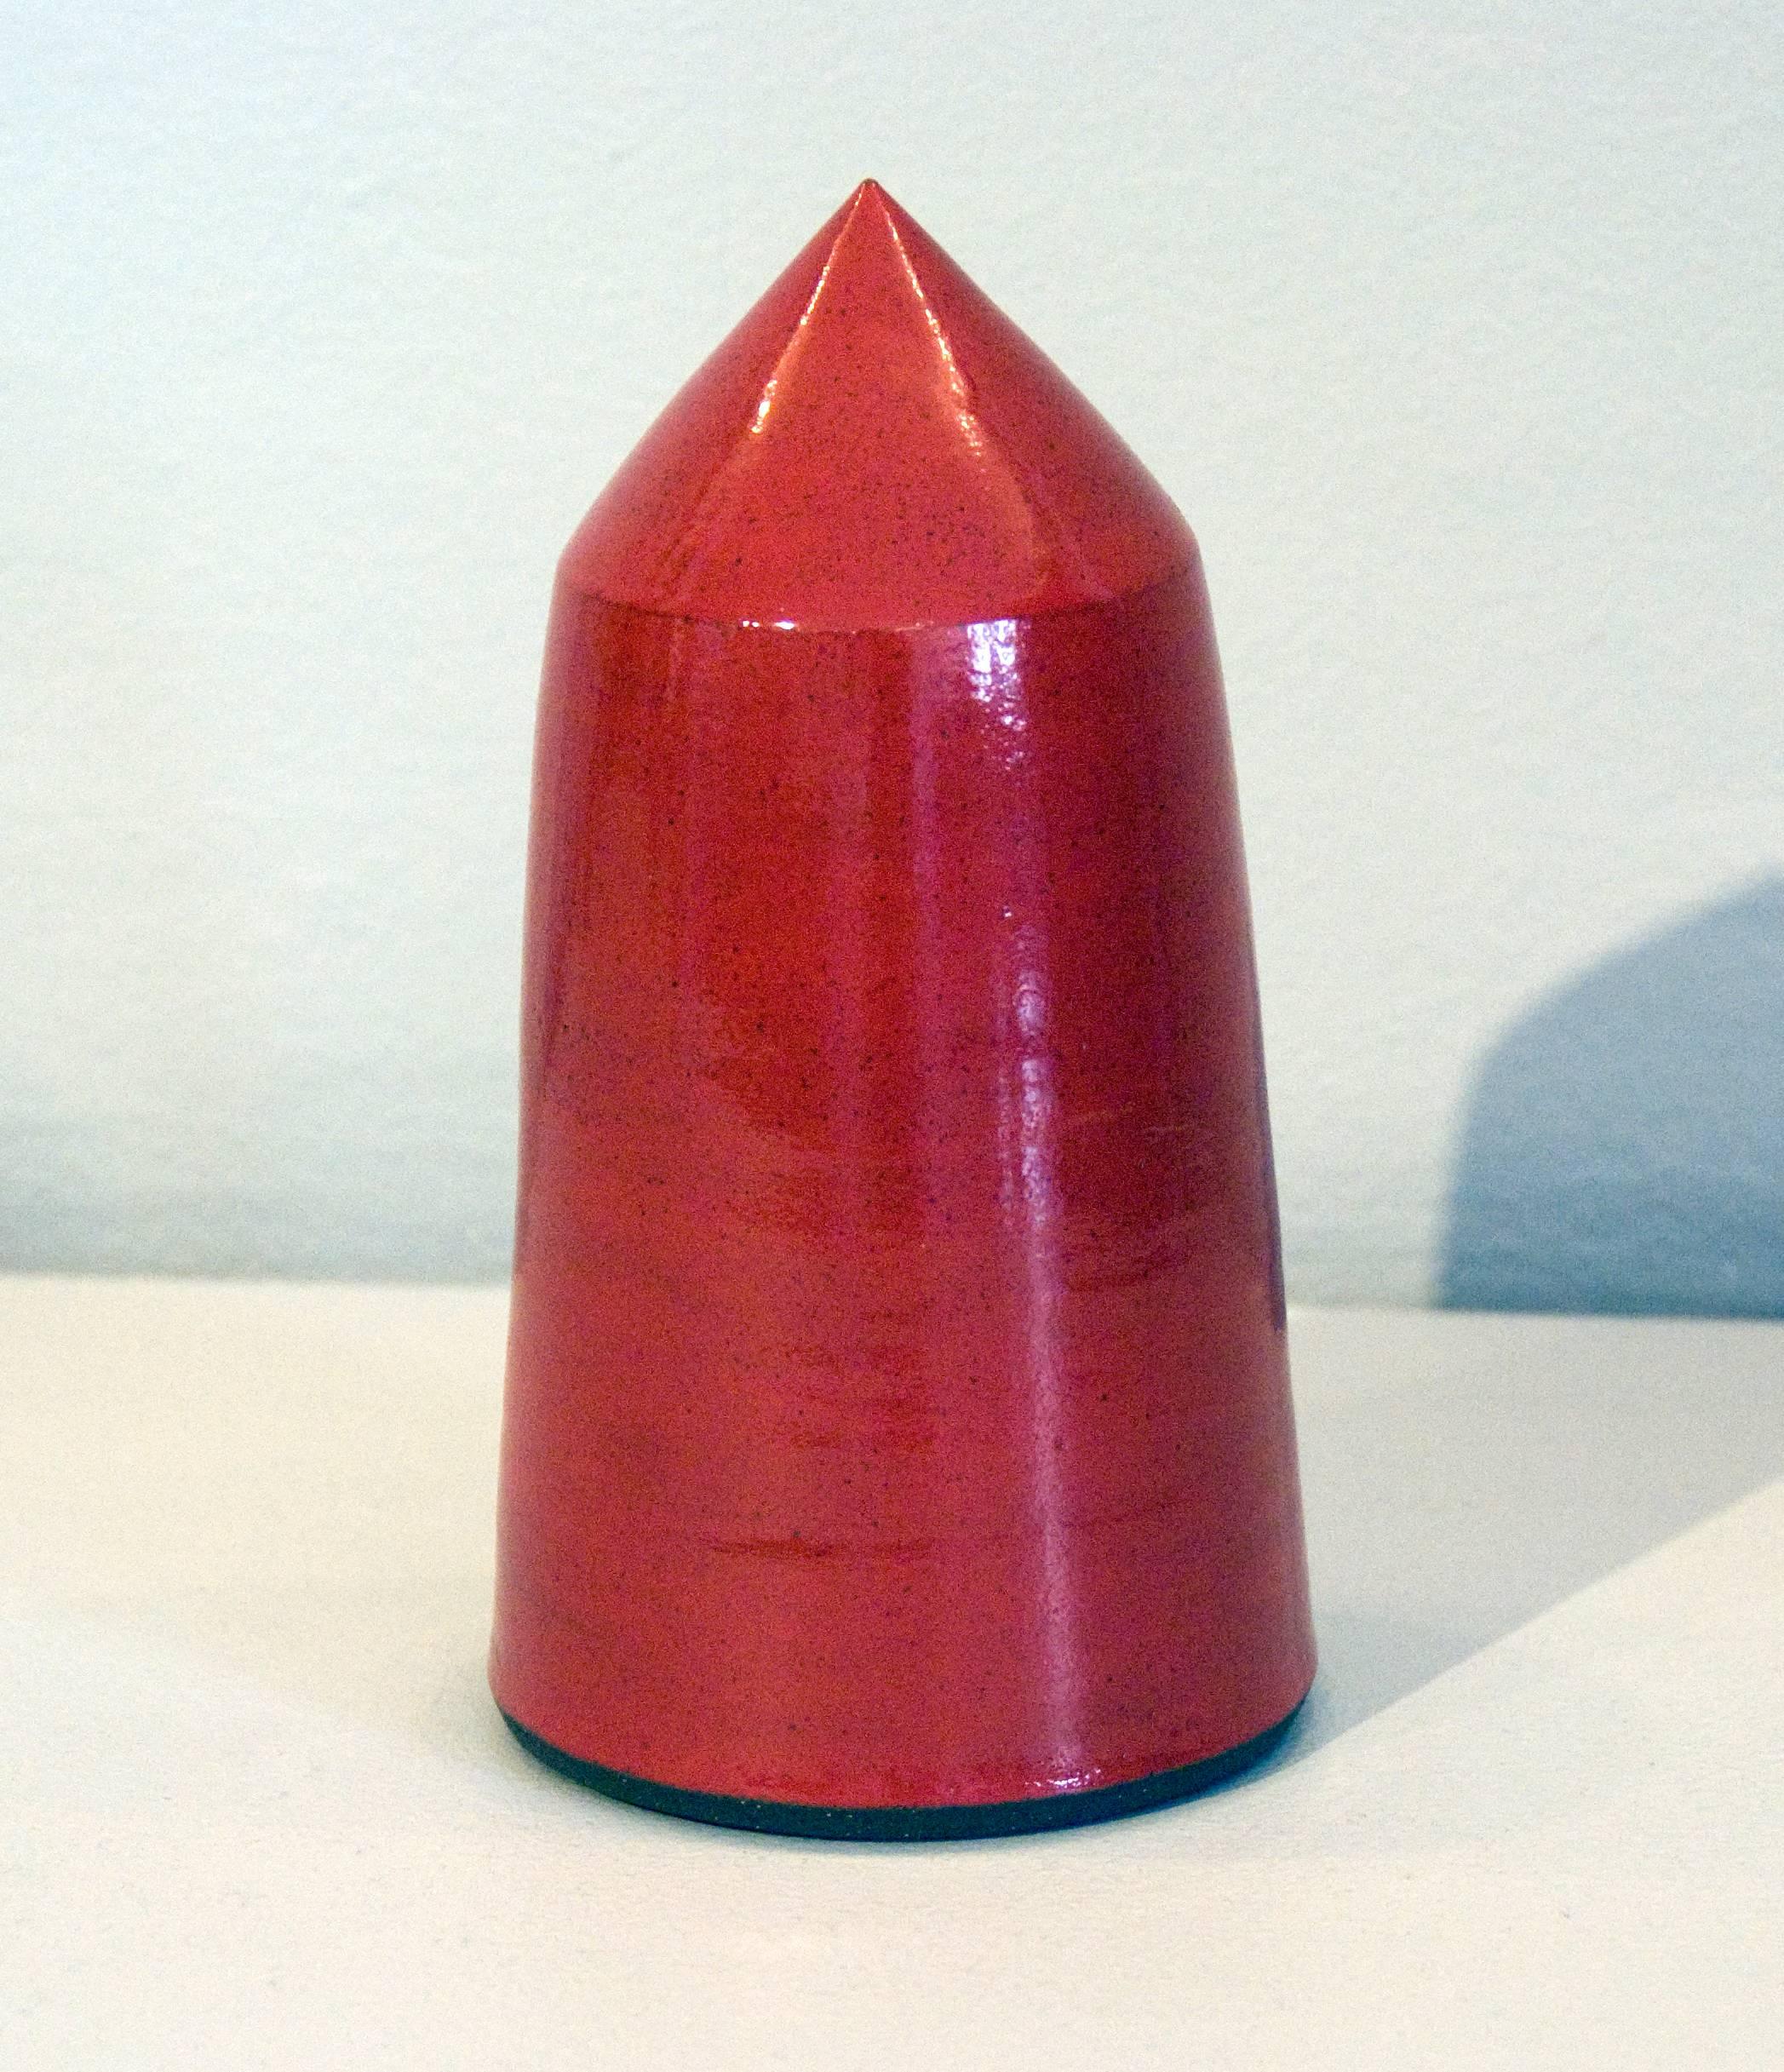 This red sculpture made of high fire stoneware with scarlet glaze from 2011 is the work of sculptor James Salaiz.

James Salaiz is a sculptor and ceramicist based in New York City. His first experience with clay was as a young child in San Antonio,